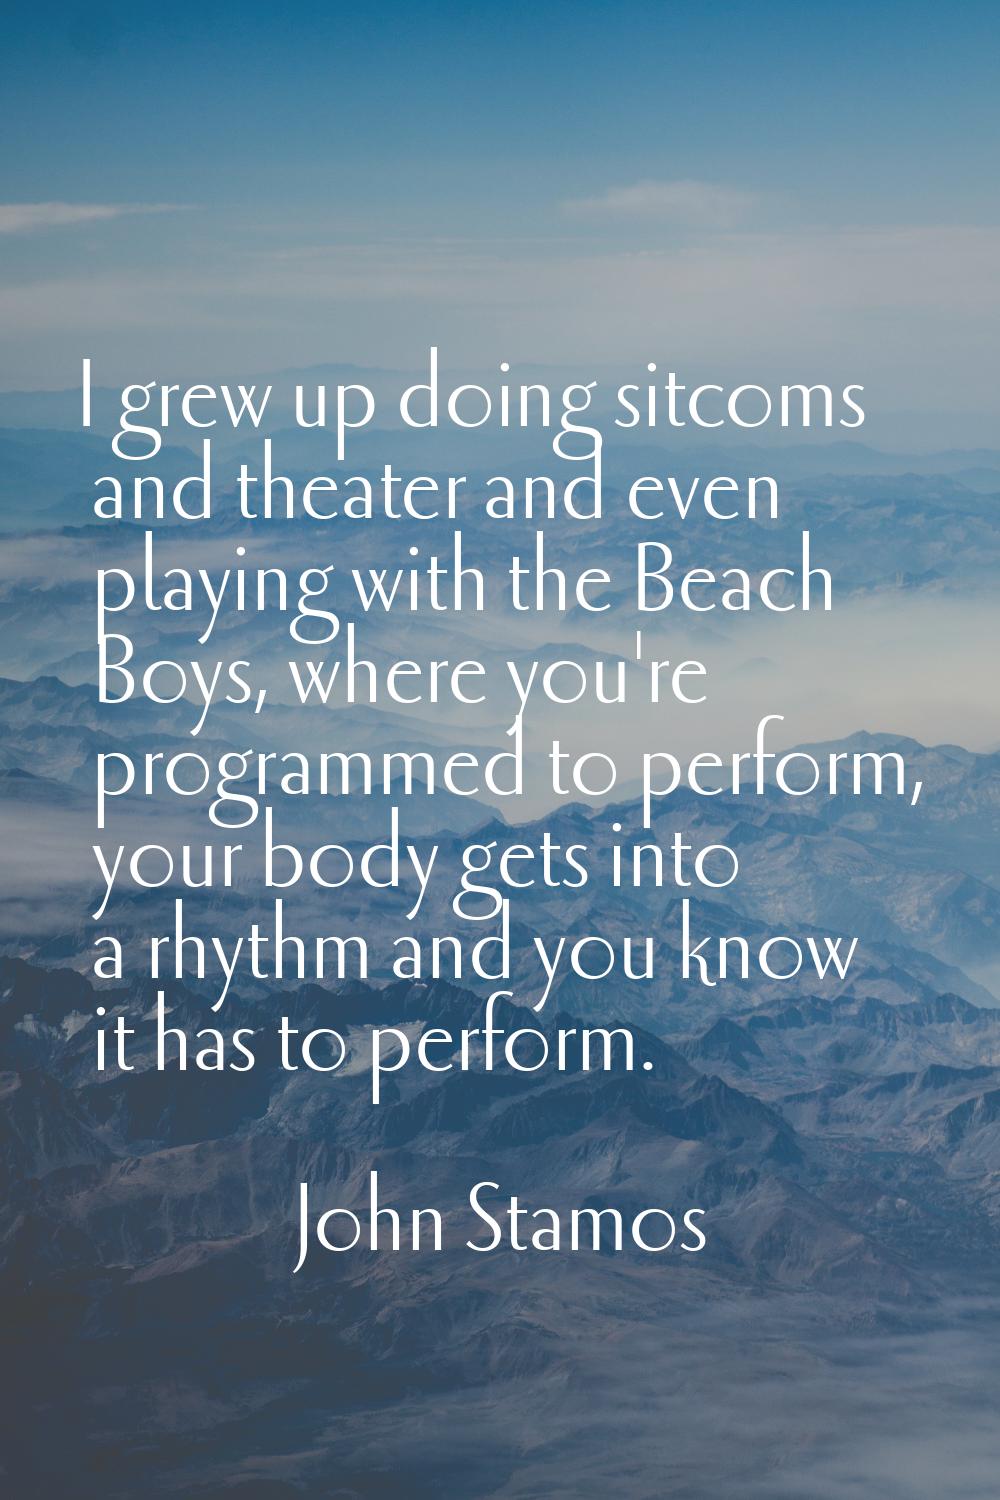 I grew up doing sitcoms and theater and even playing with the Beach Boys, where you're programmed t